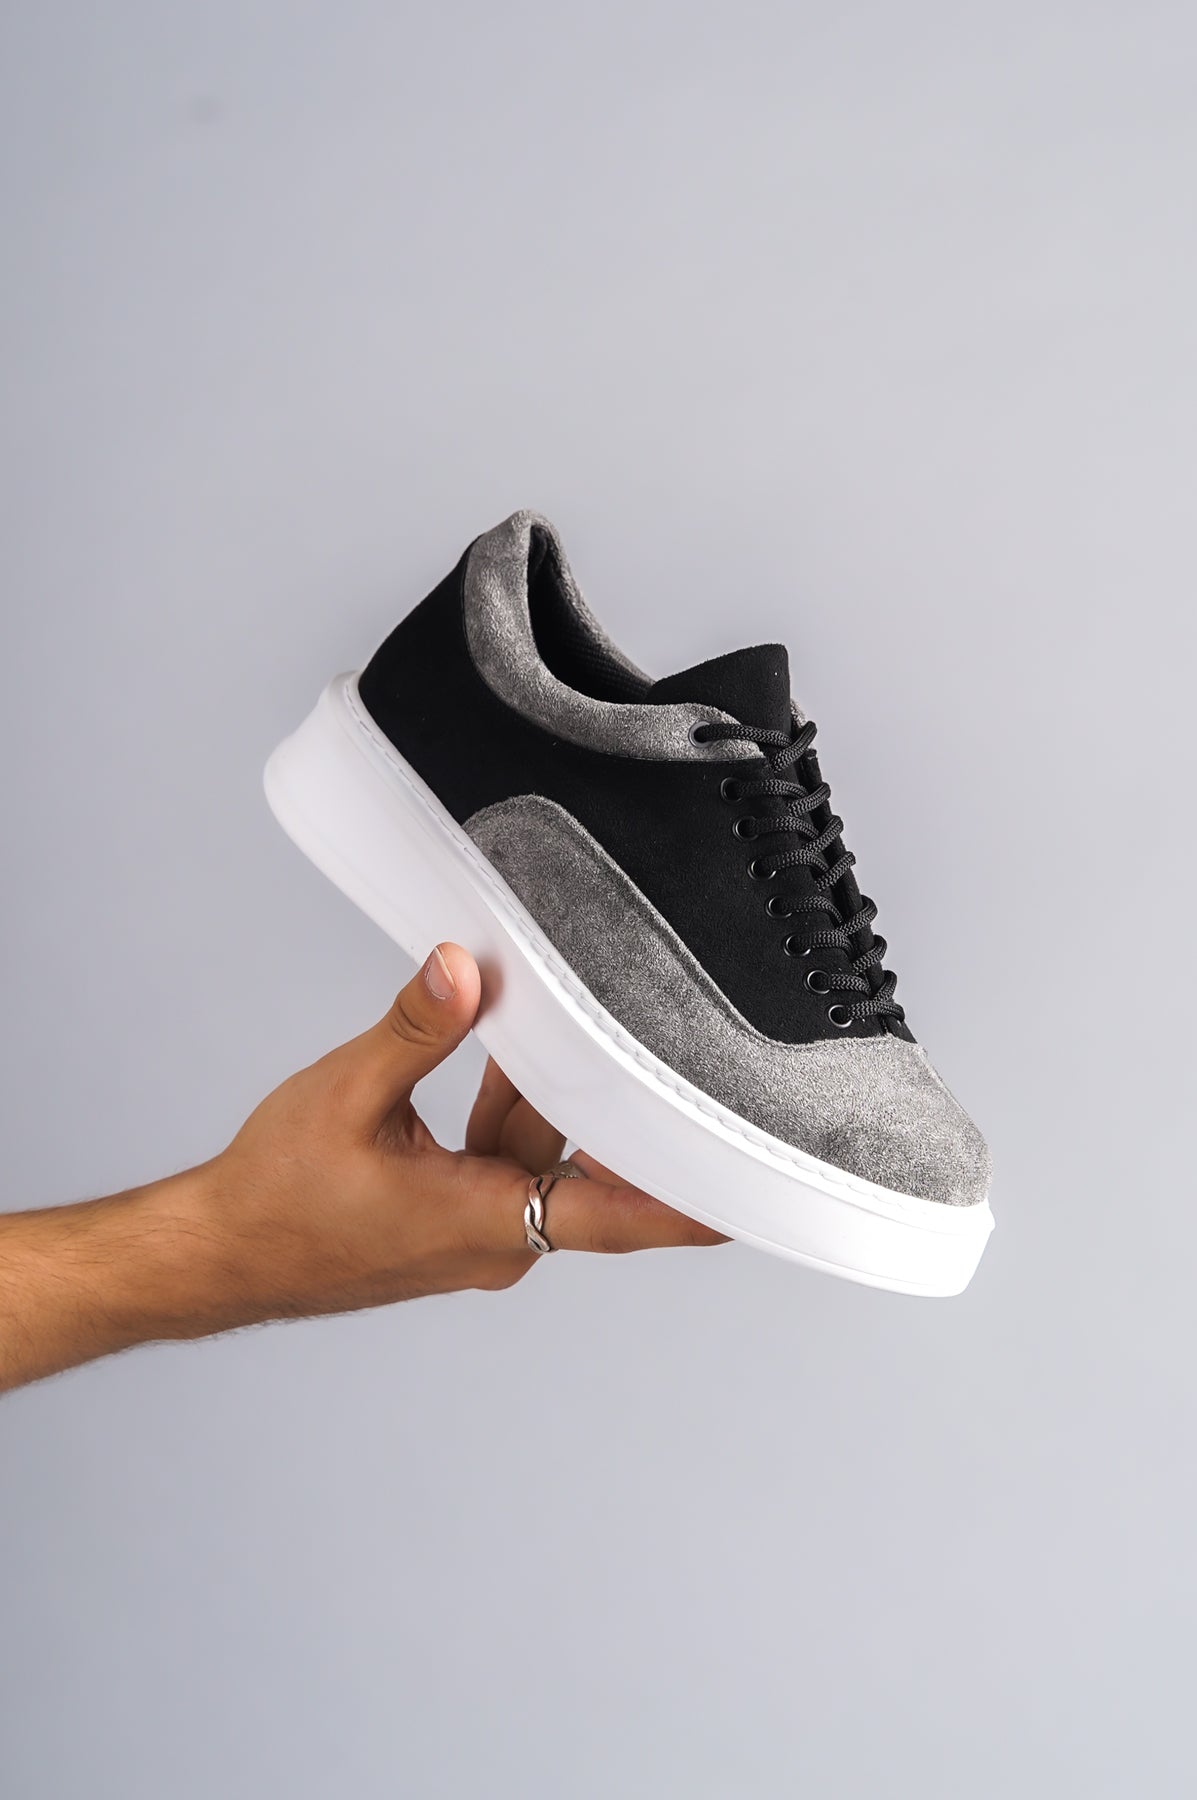 KB-005 Black Gray Suede Laced Casual Men's Sneakers Shoes - STREETMODE™